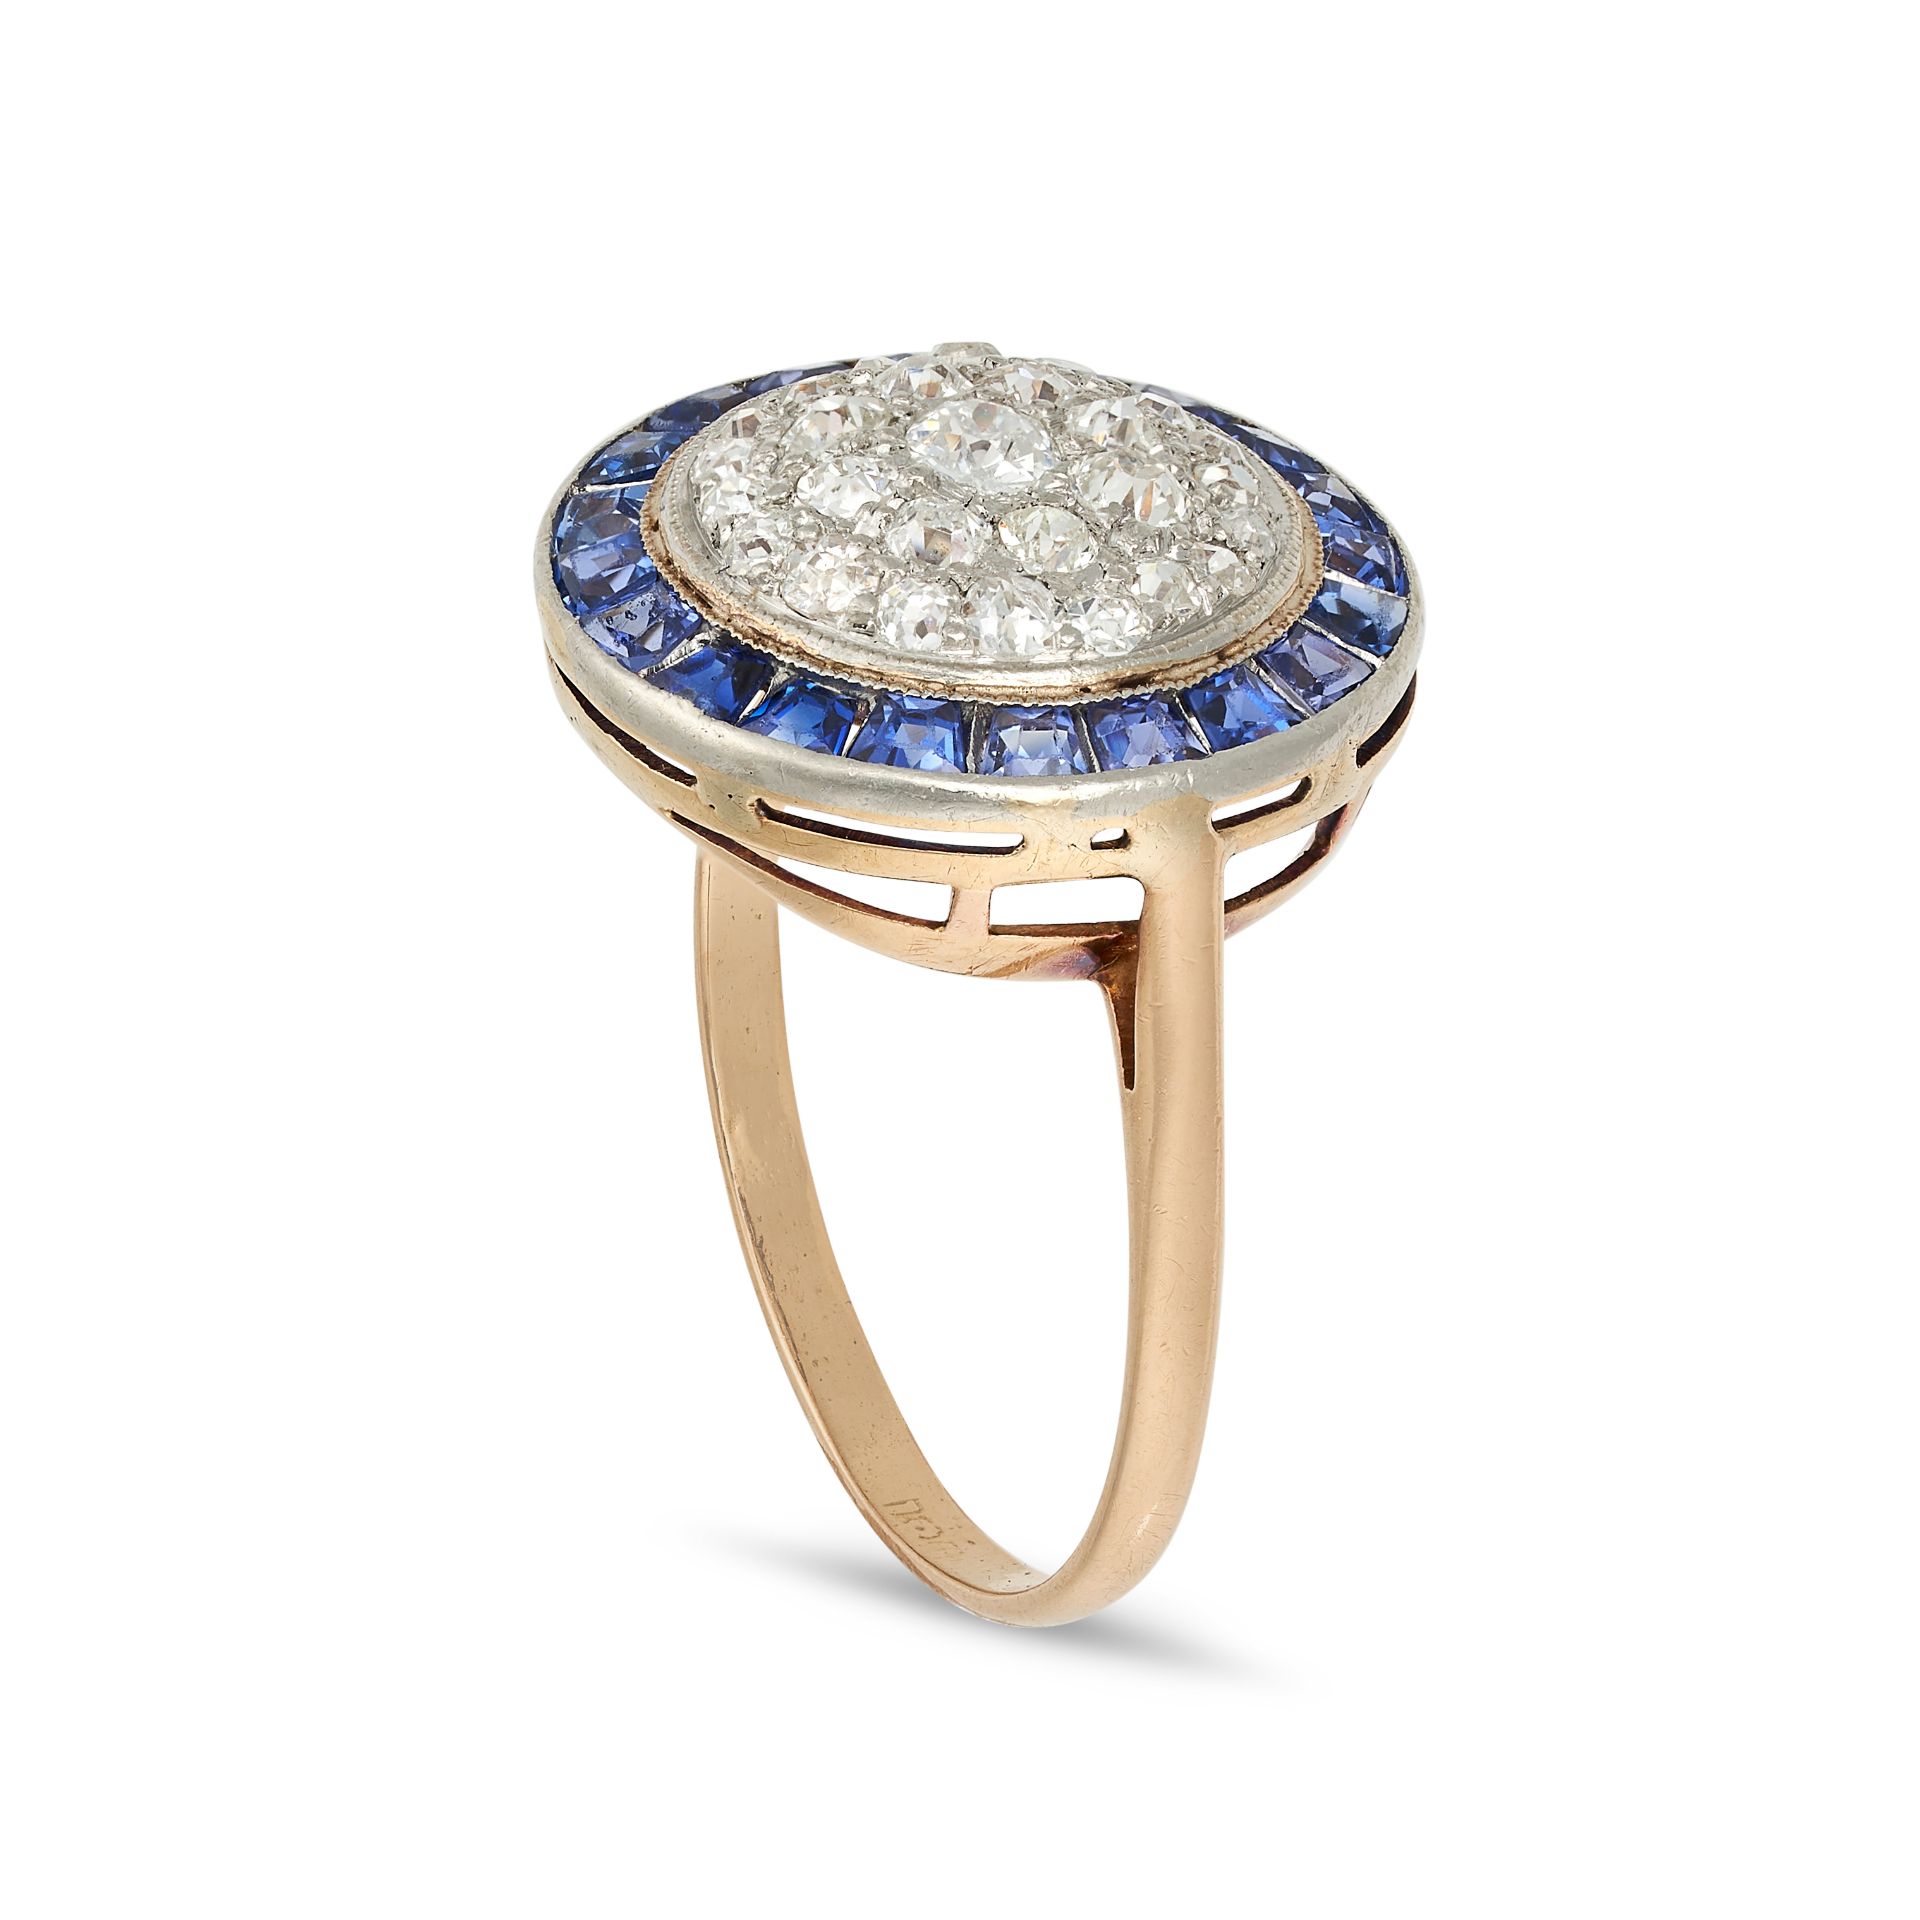 AN ART DECO SAPPHIRE AND DIAMOND TARGET RING in 18ct yellow gold and platinum, set with a cluster... - Image 2 of 2